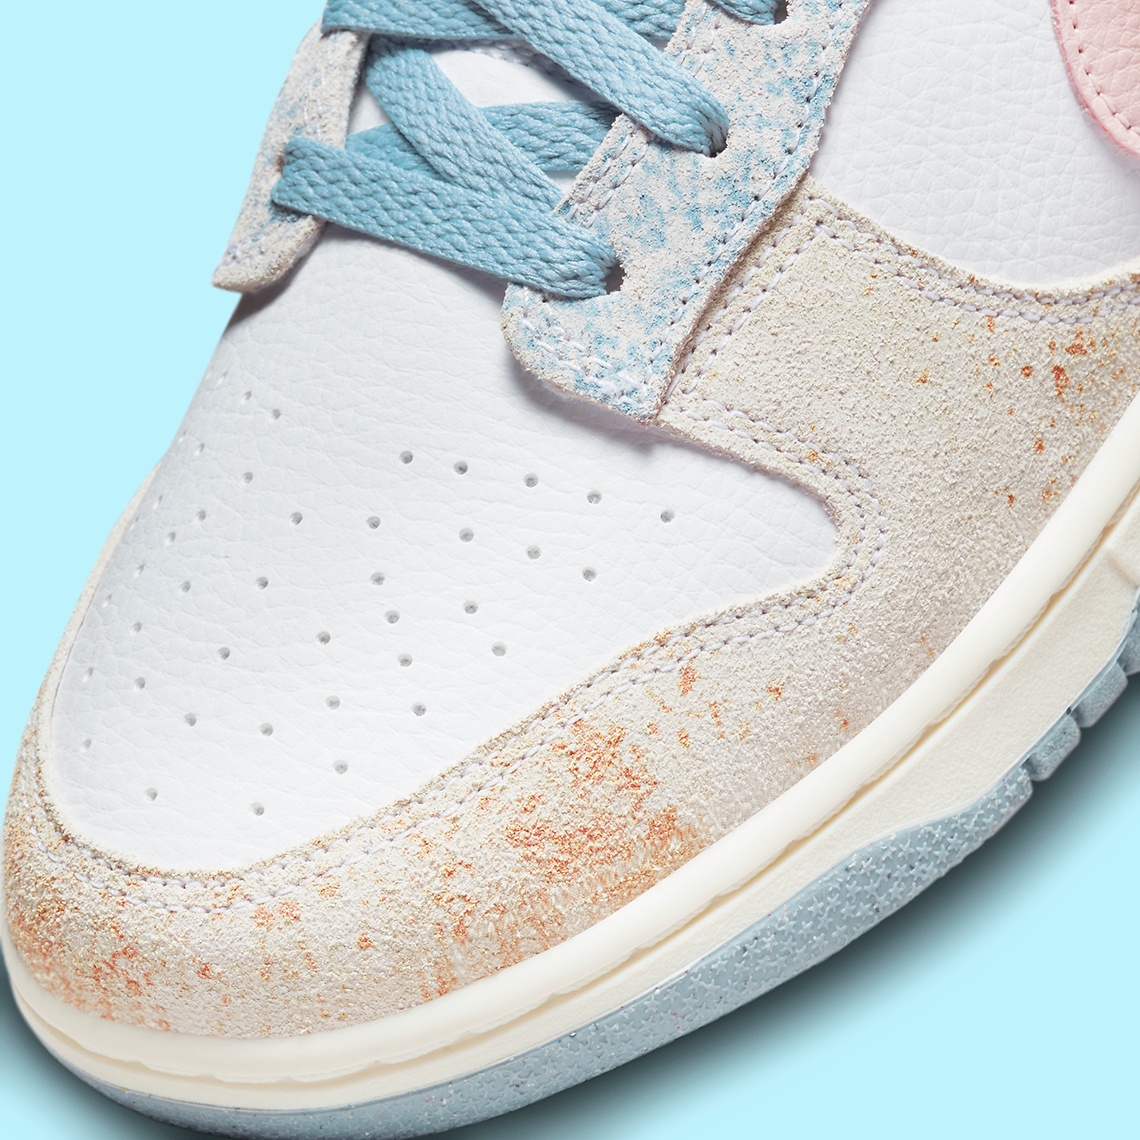 Nike Dunk Low Pink Blue Faded Dv6486 100 1